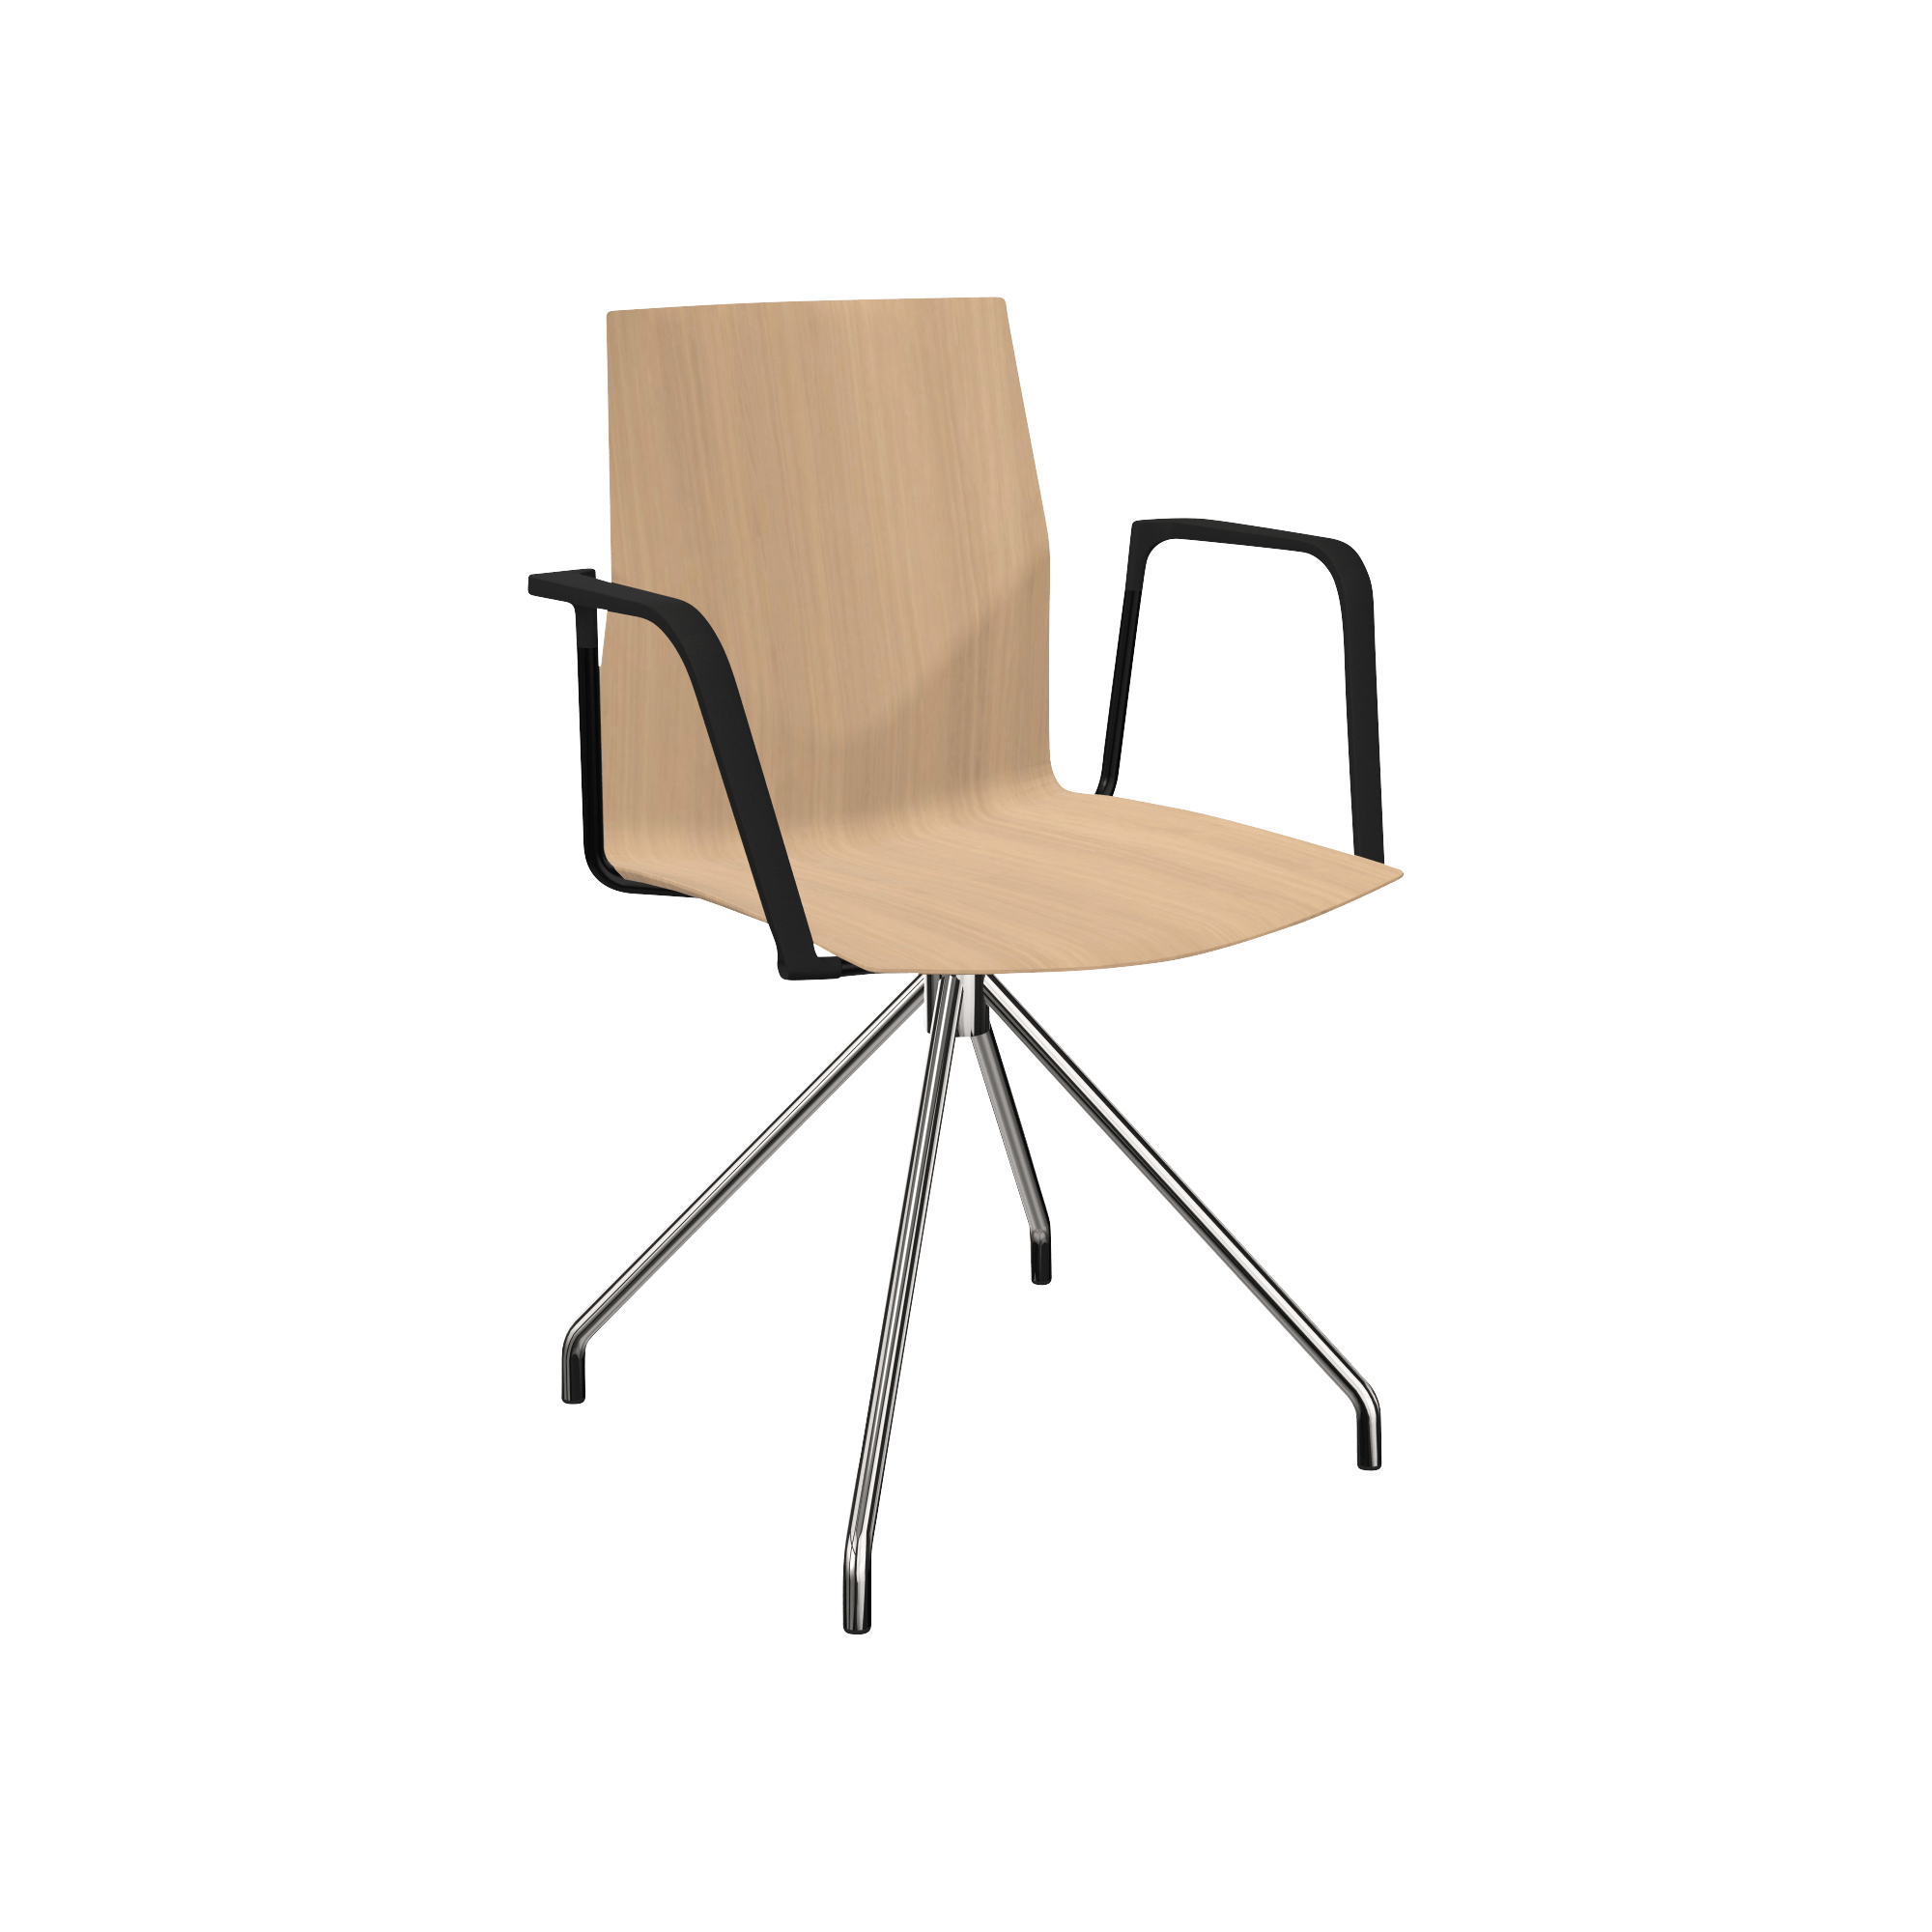 Wooden chair with black arm rests and chrome leg